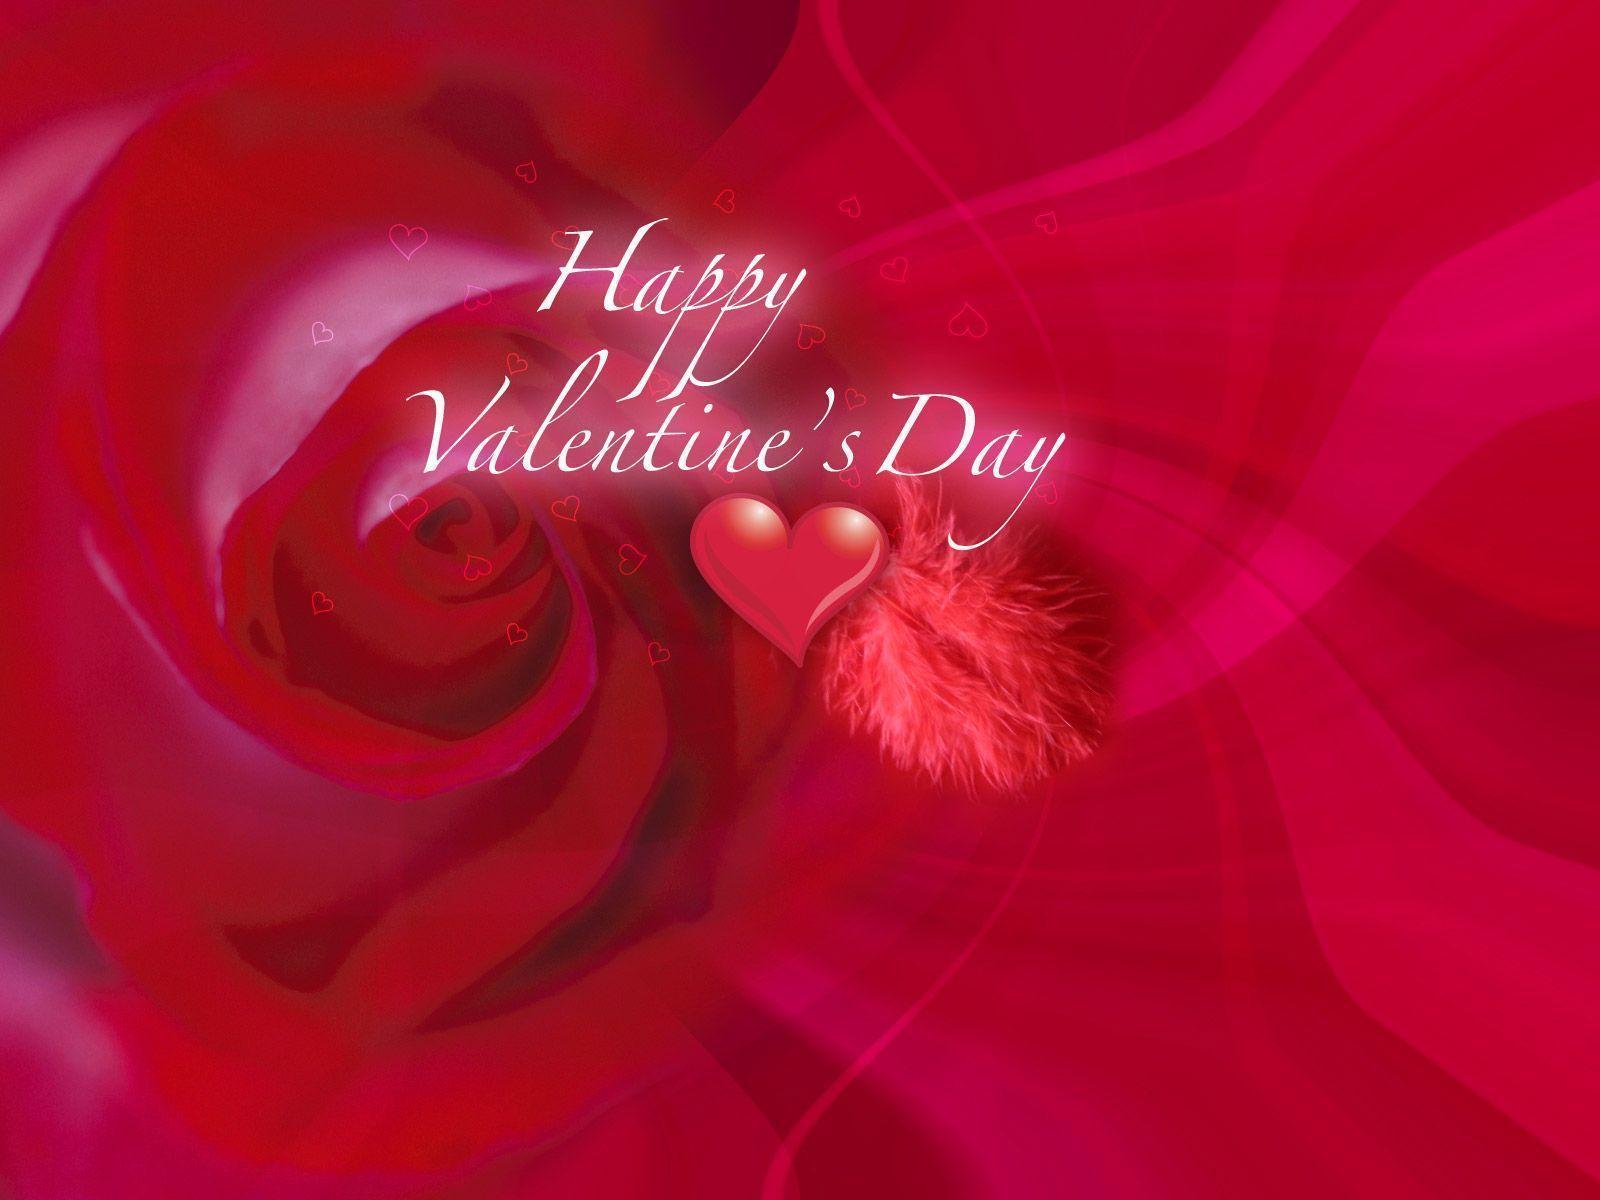 Happy Valentine&;s Day 2014 Wallpaper Cards Greetings Wishes